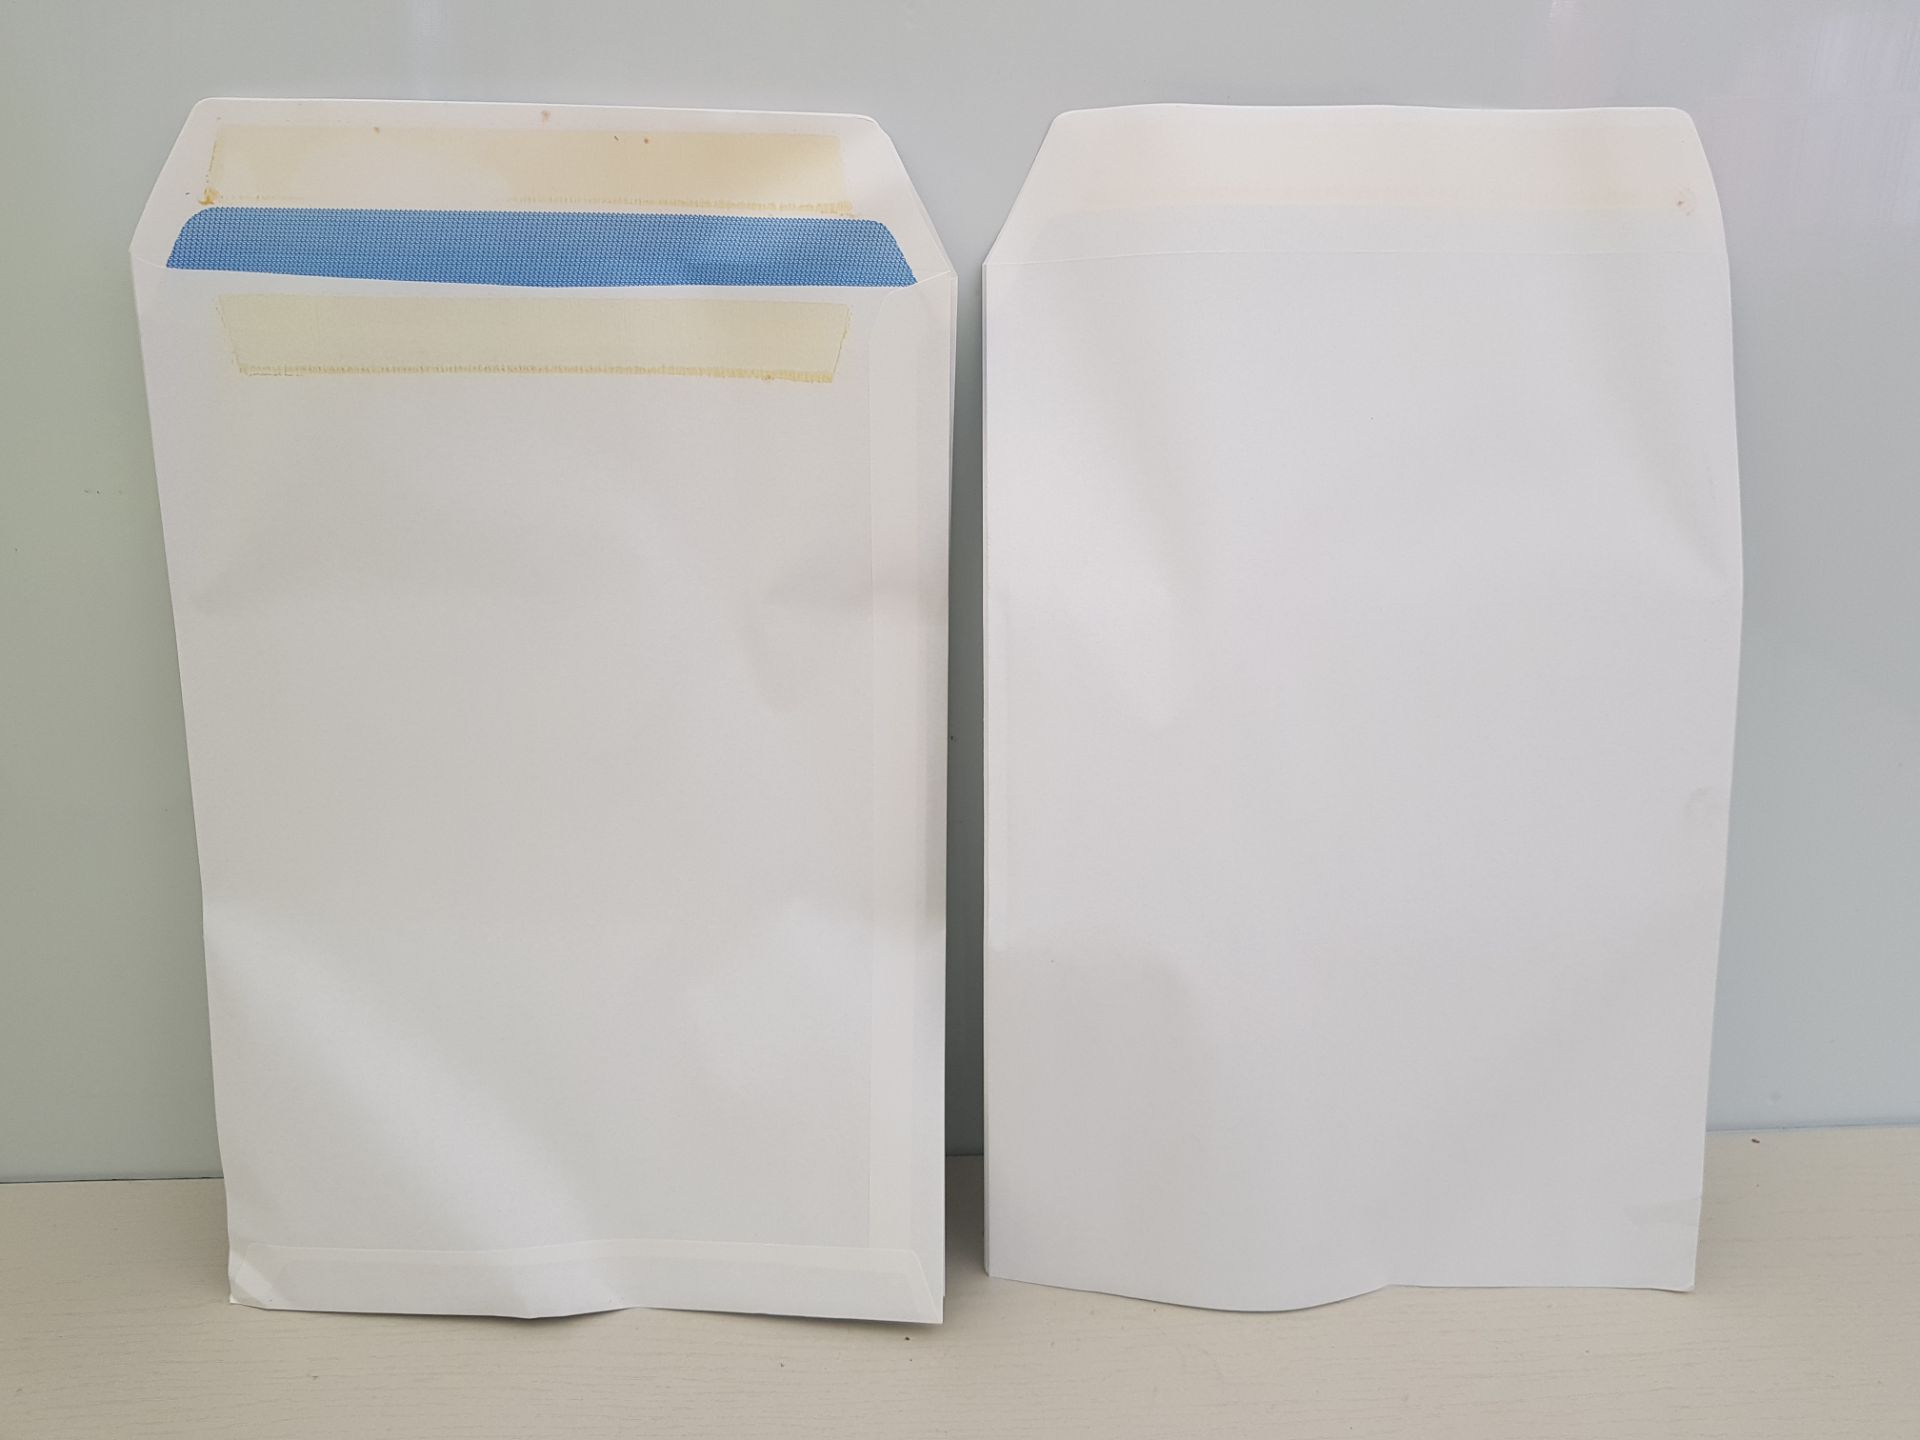 5000 + BRAND NEW ENVELOPES POCKETS - SELF SEAL - FOR A4 PAPER ( C4 229 X 324 ) COMES IN 21 BOXES